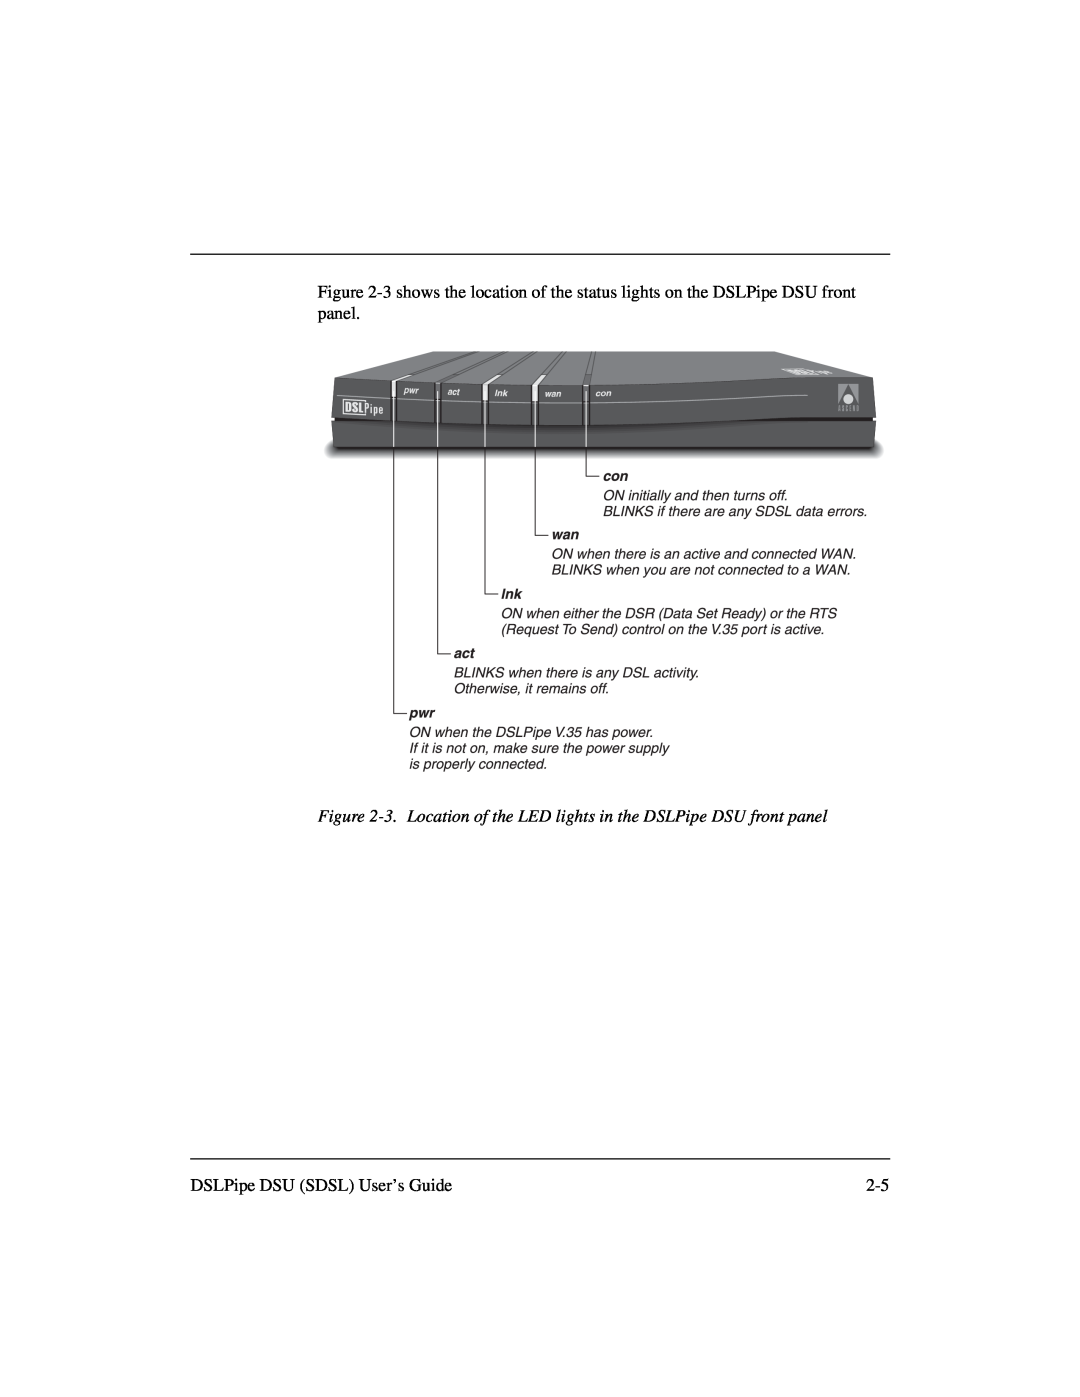 Lucent Technologies 7820-0657-001 manual 3. Location of the LED lights in the DSLPipe DSU front panel 